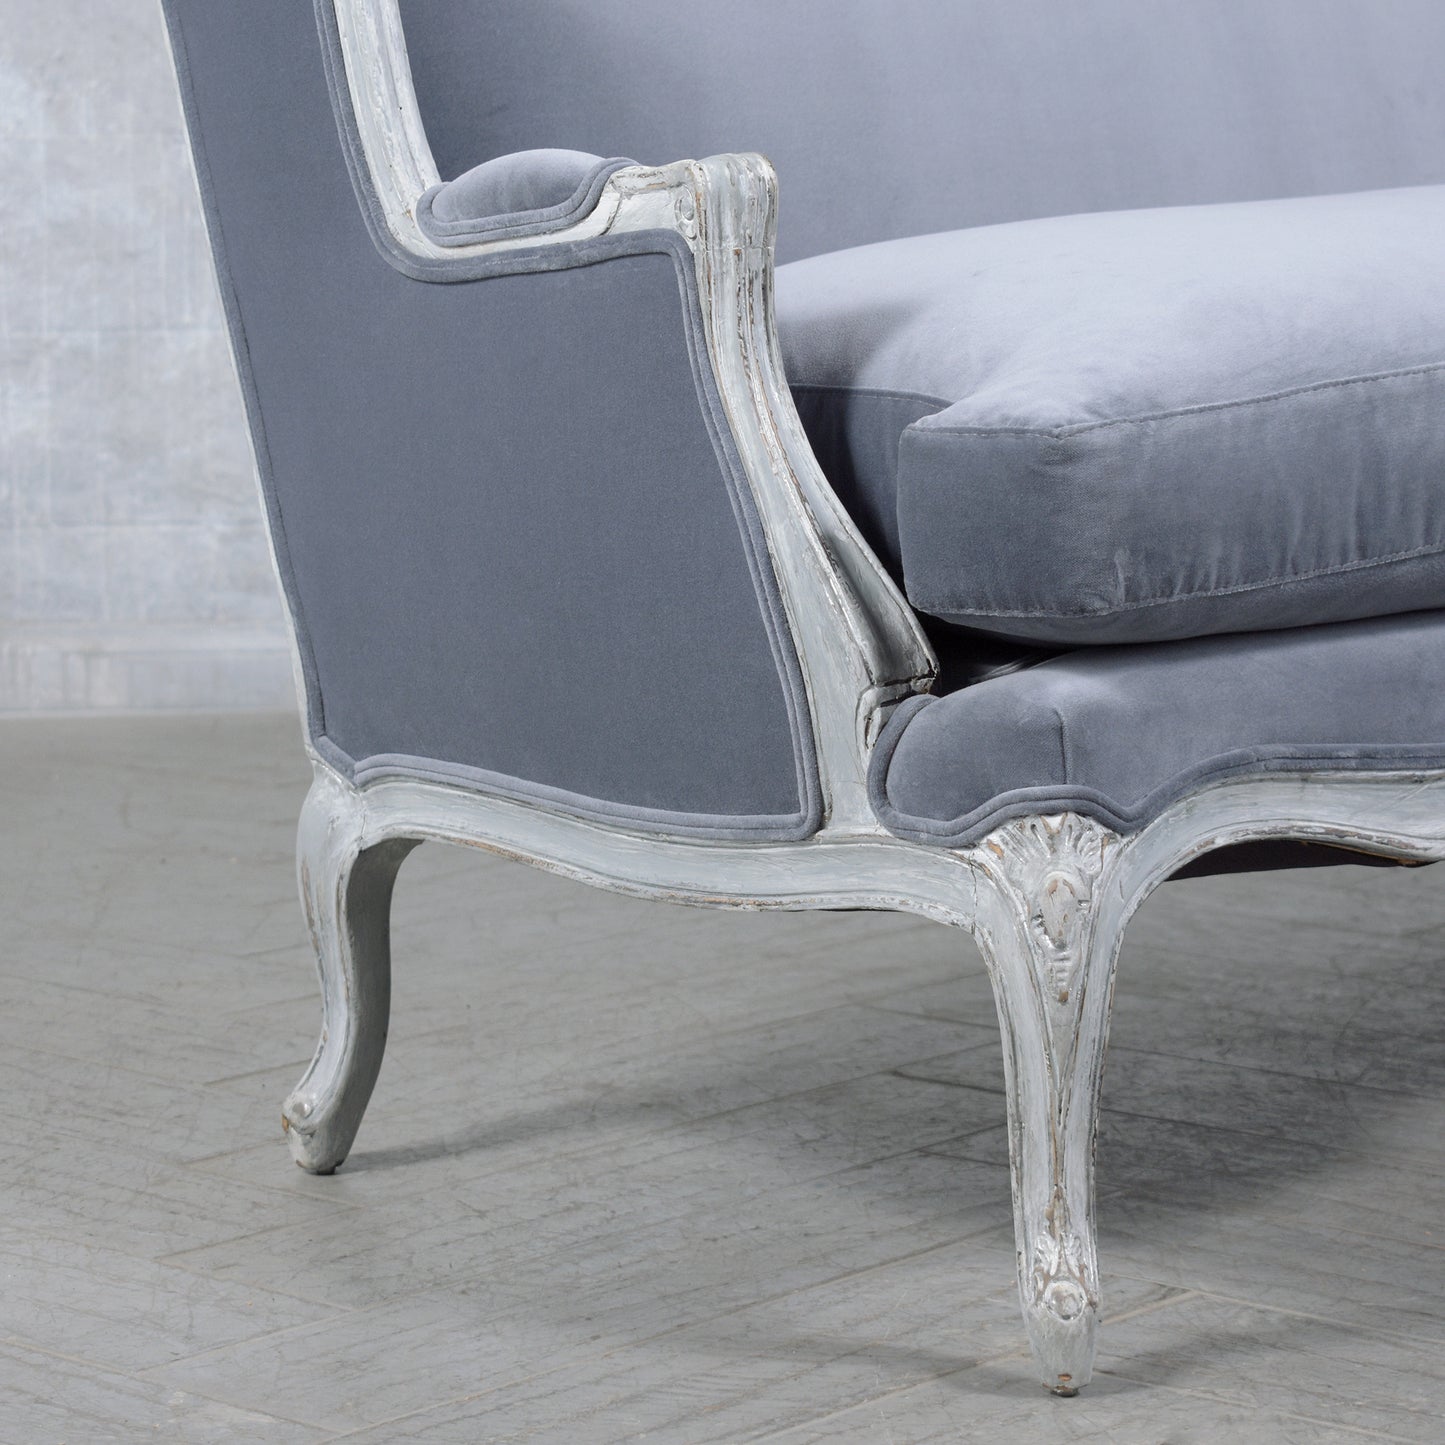 Revived French Louis XV Style Loveseat: A Fusion of Elegance & Comfort